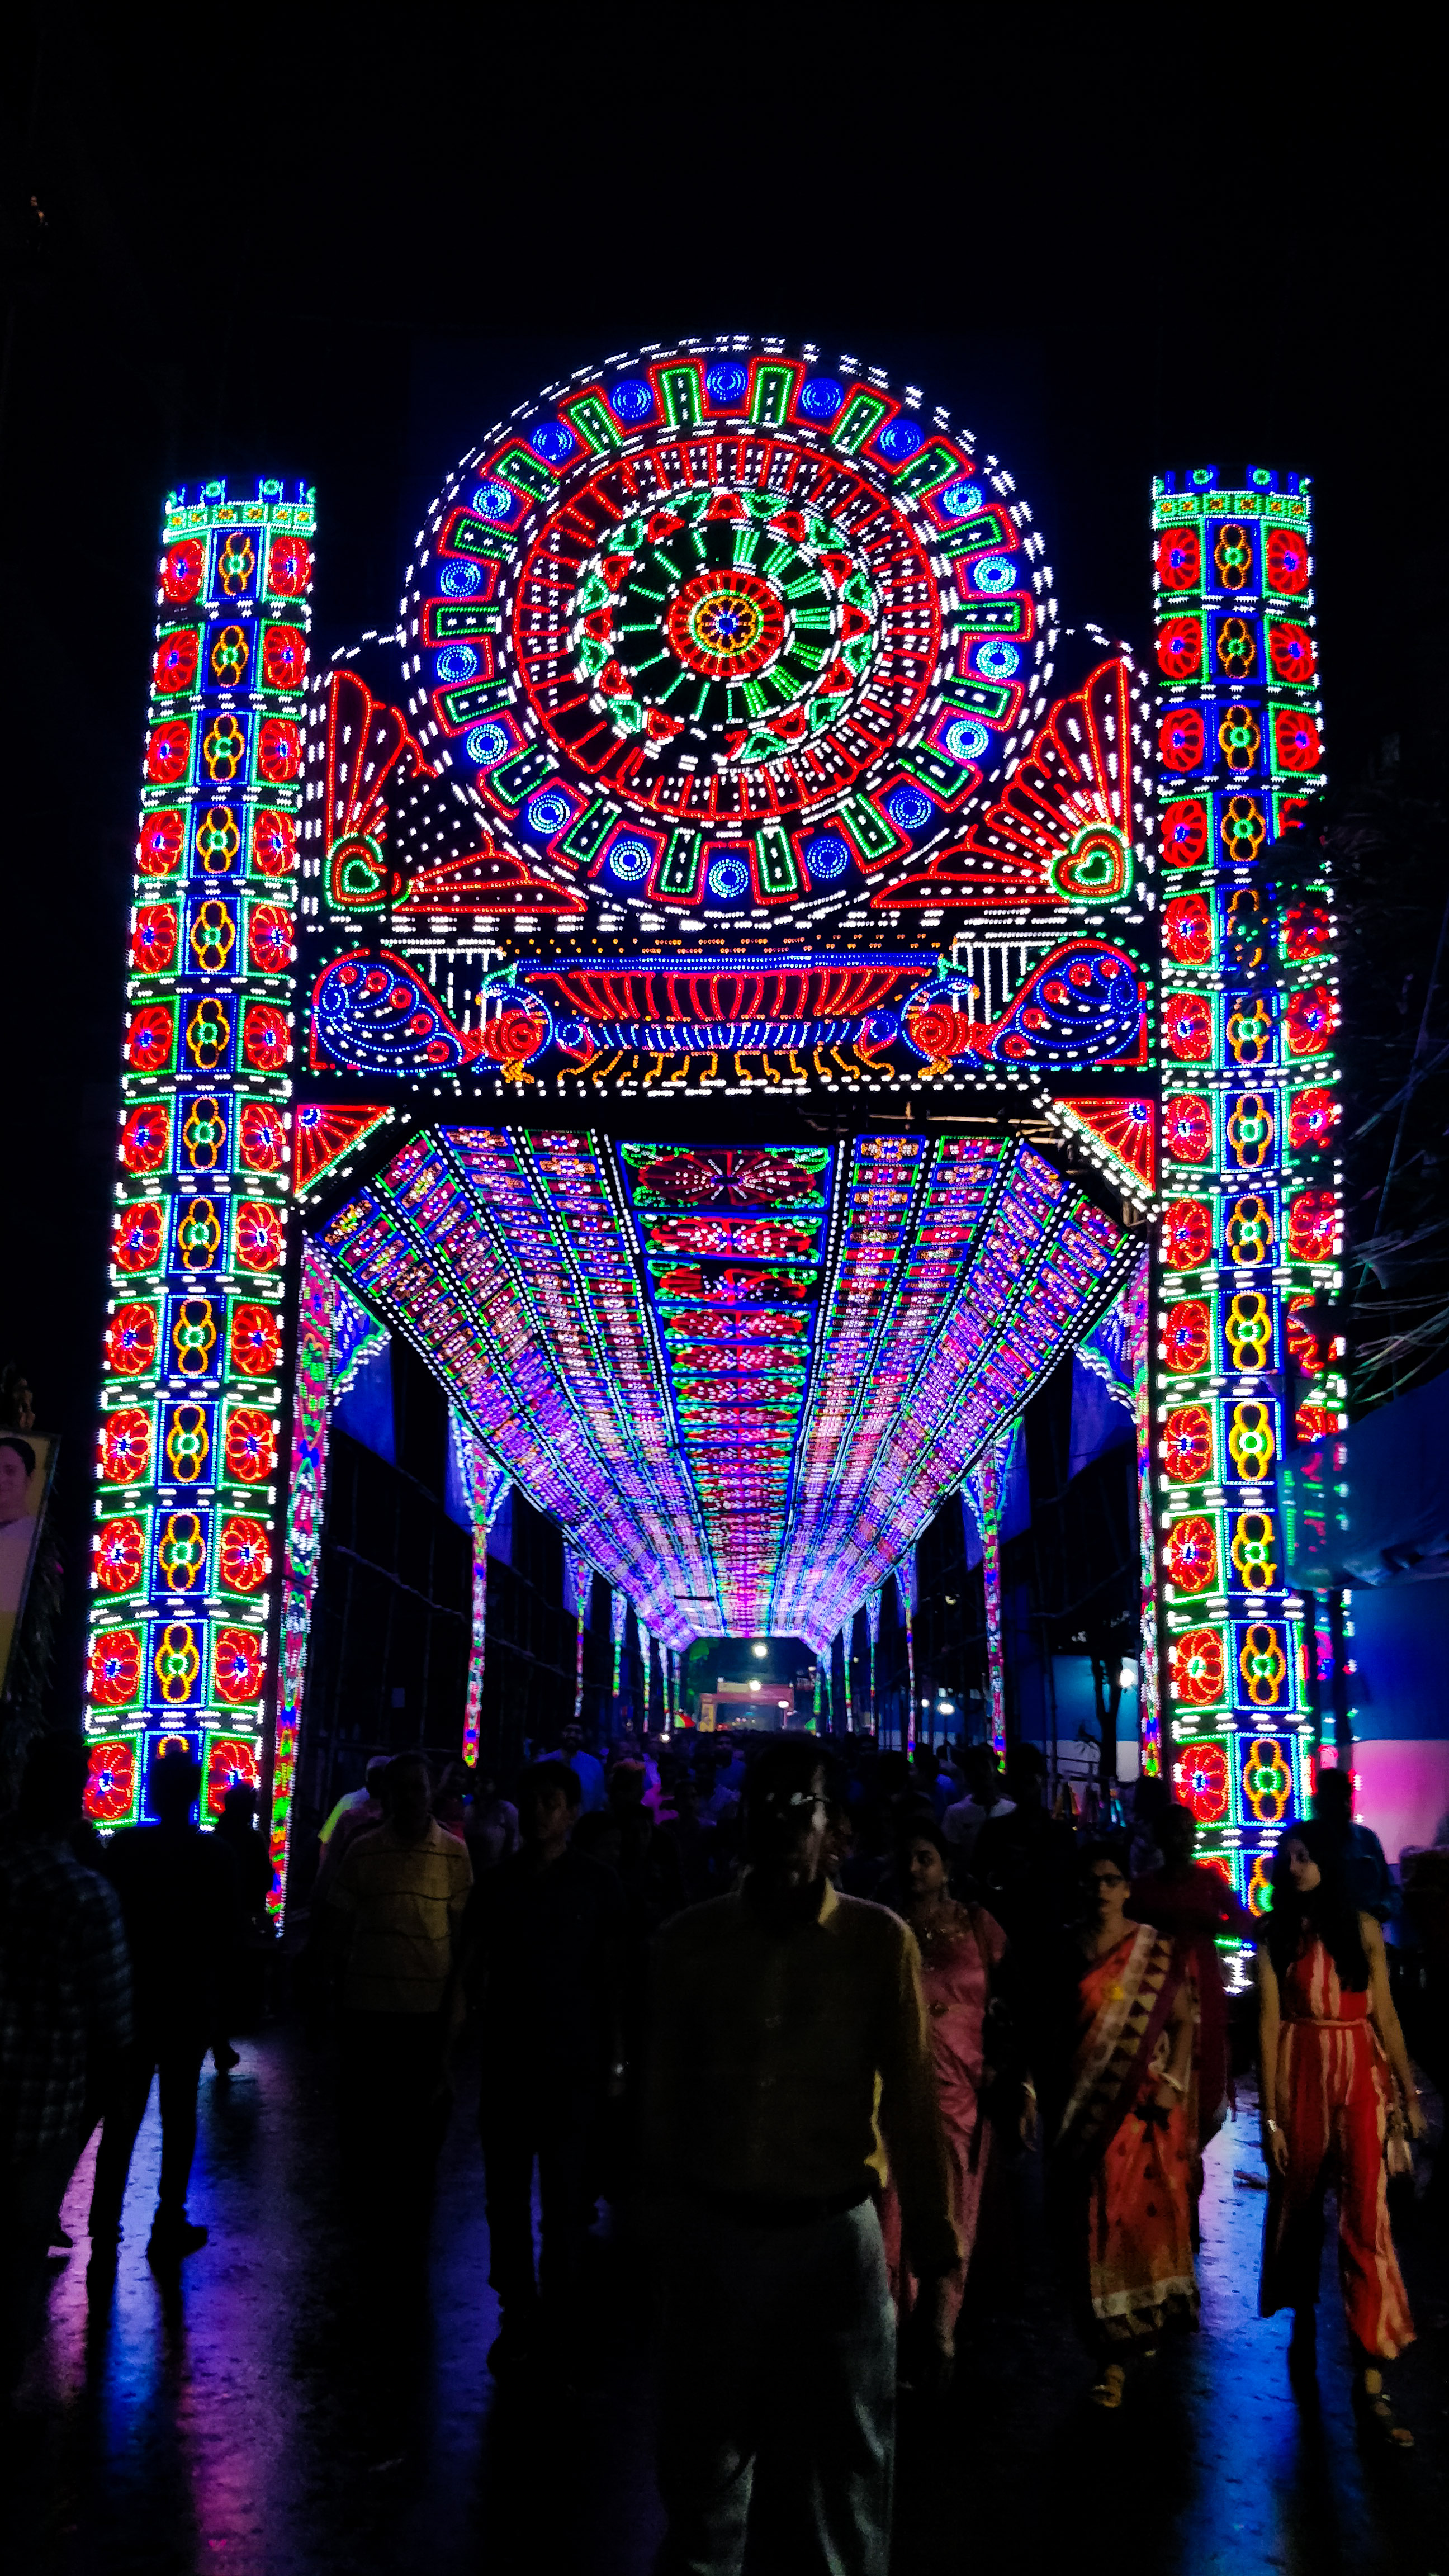 At night these archways light up the streets with their colourful displays